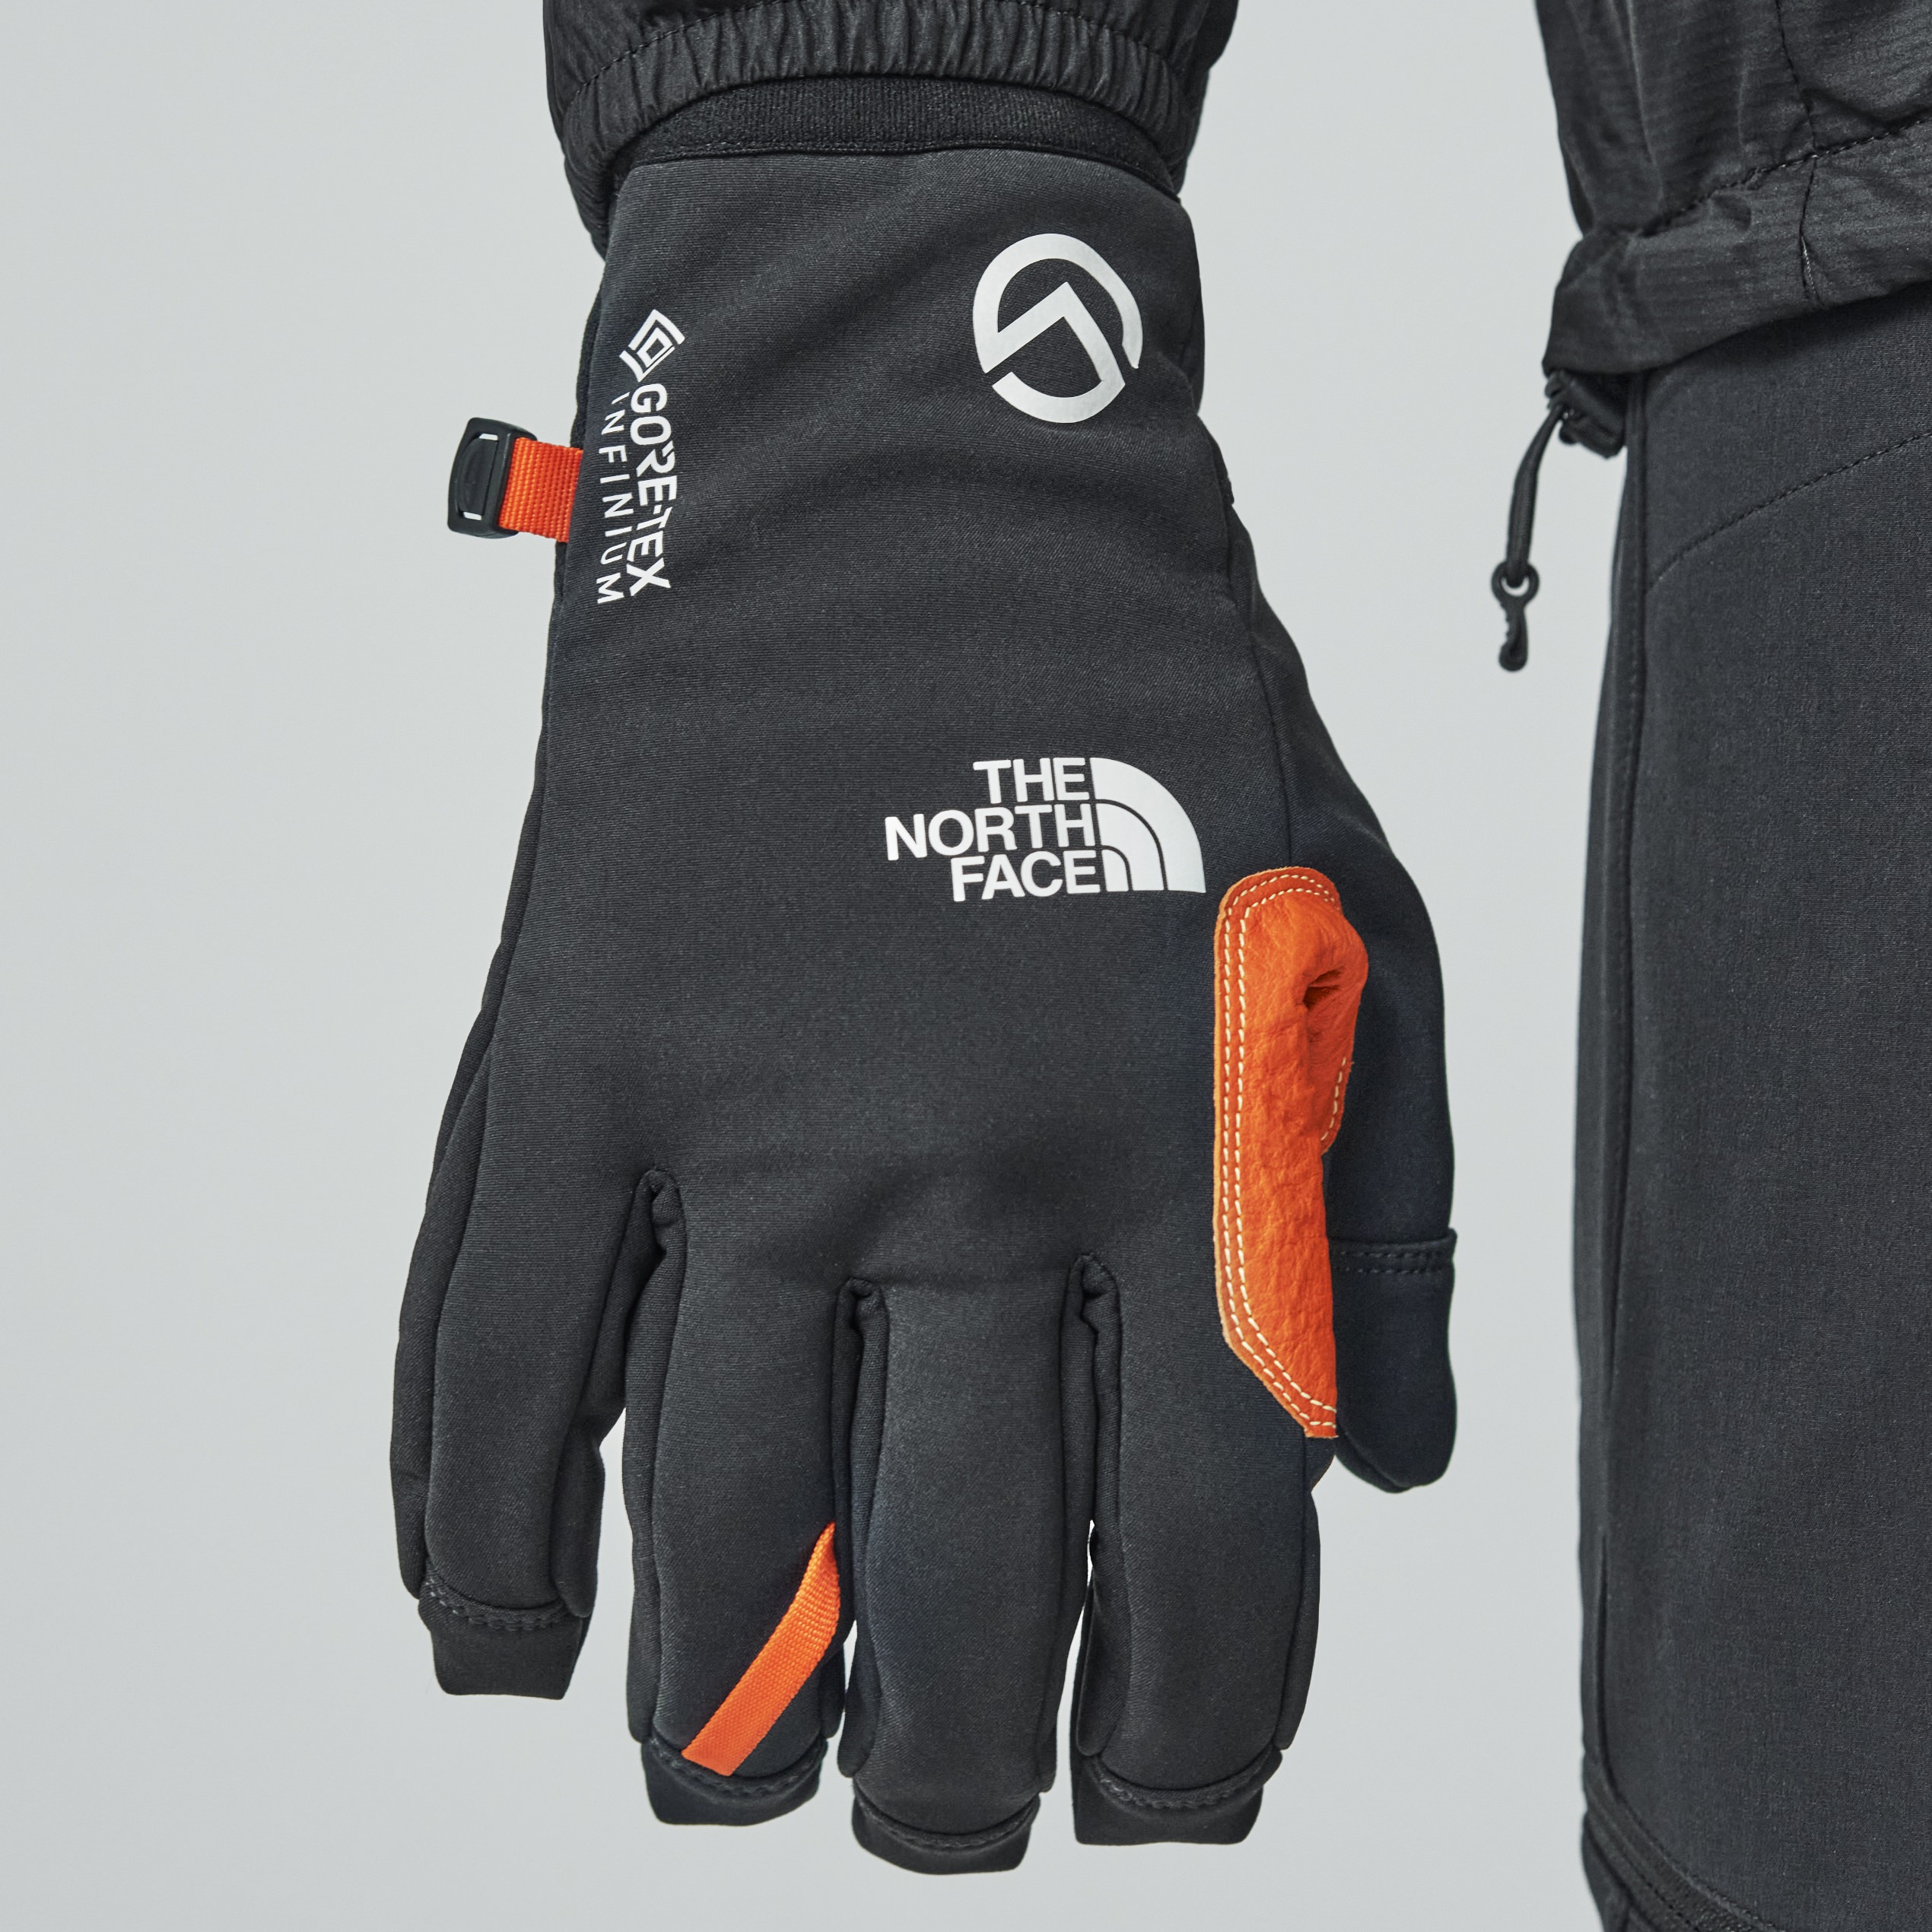 INFERNO APPROACH GLOVE(NN62202) - THE NORTH FACE MOUNTAIN